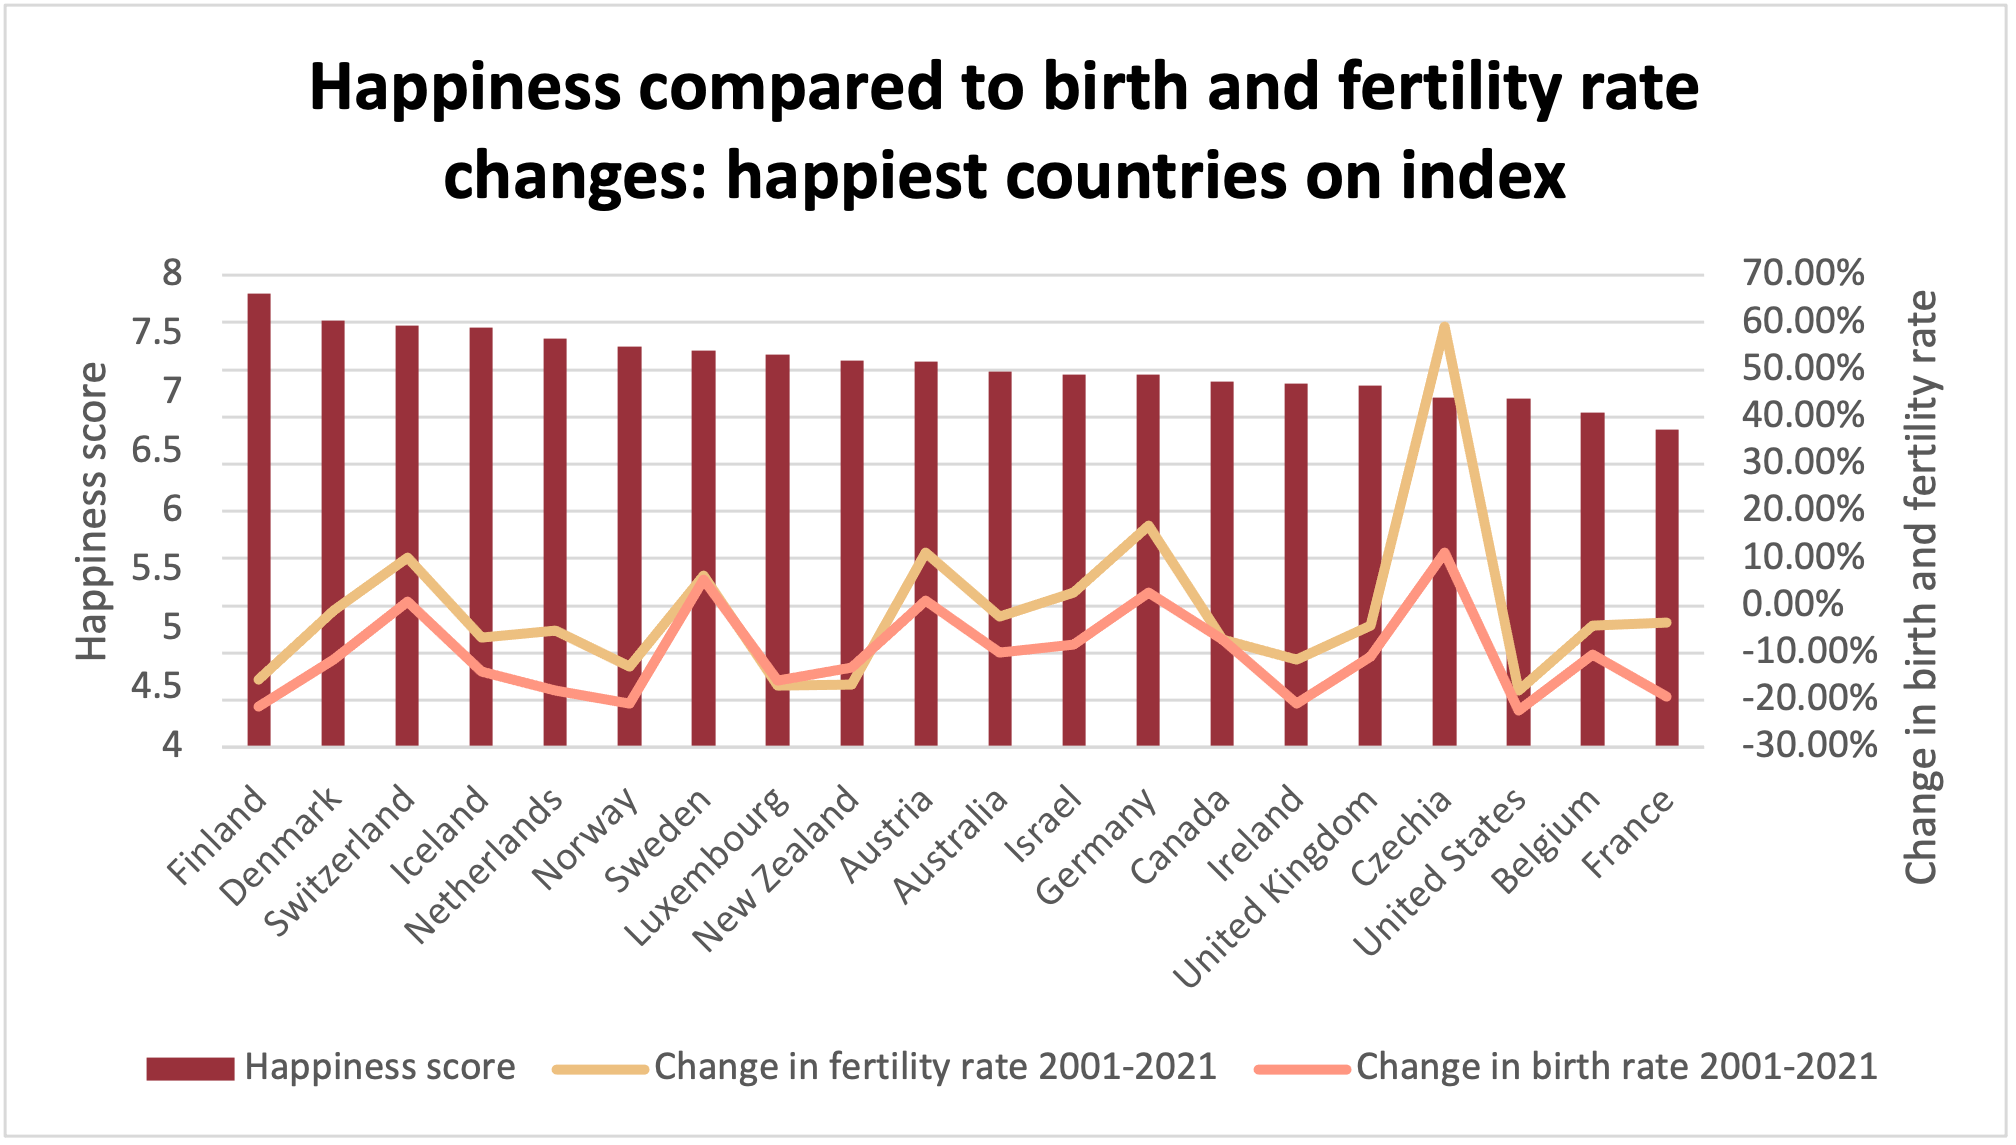 Bar chart showing the happiness score of differnet countries compared to changes in fertility and birth rate